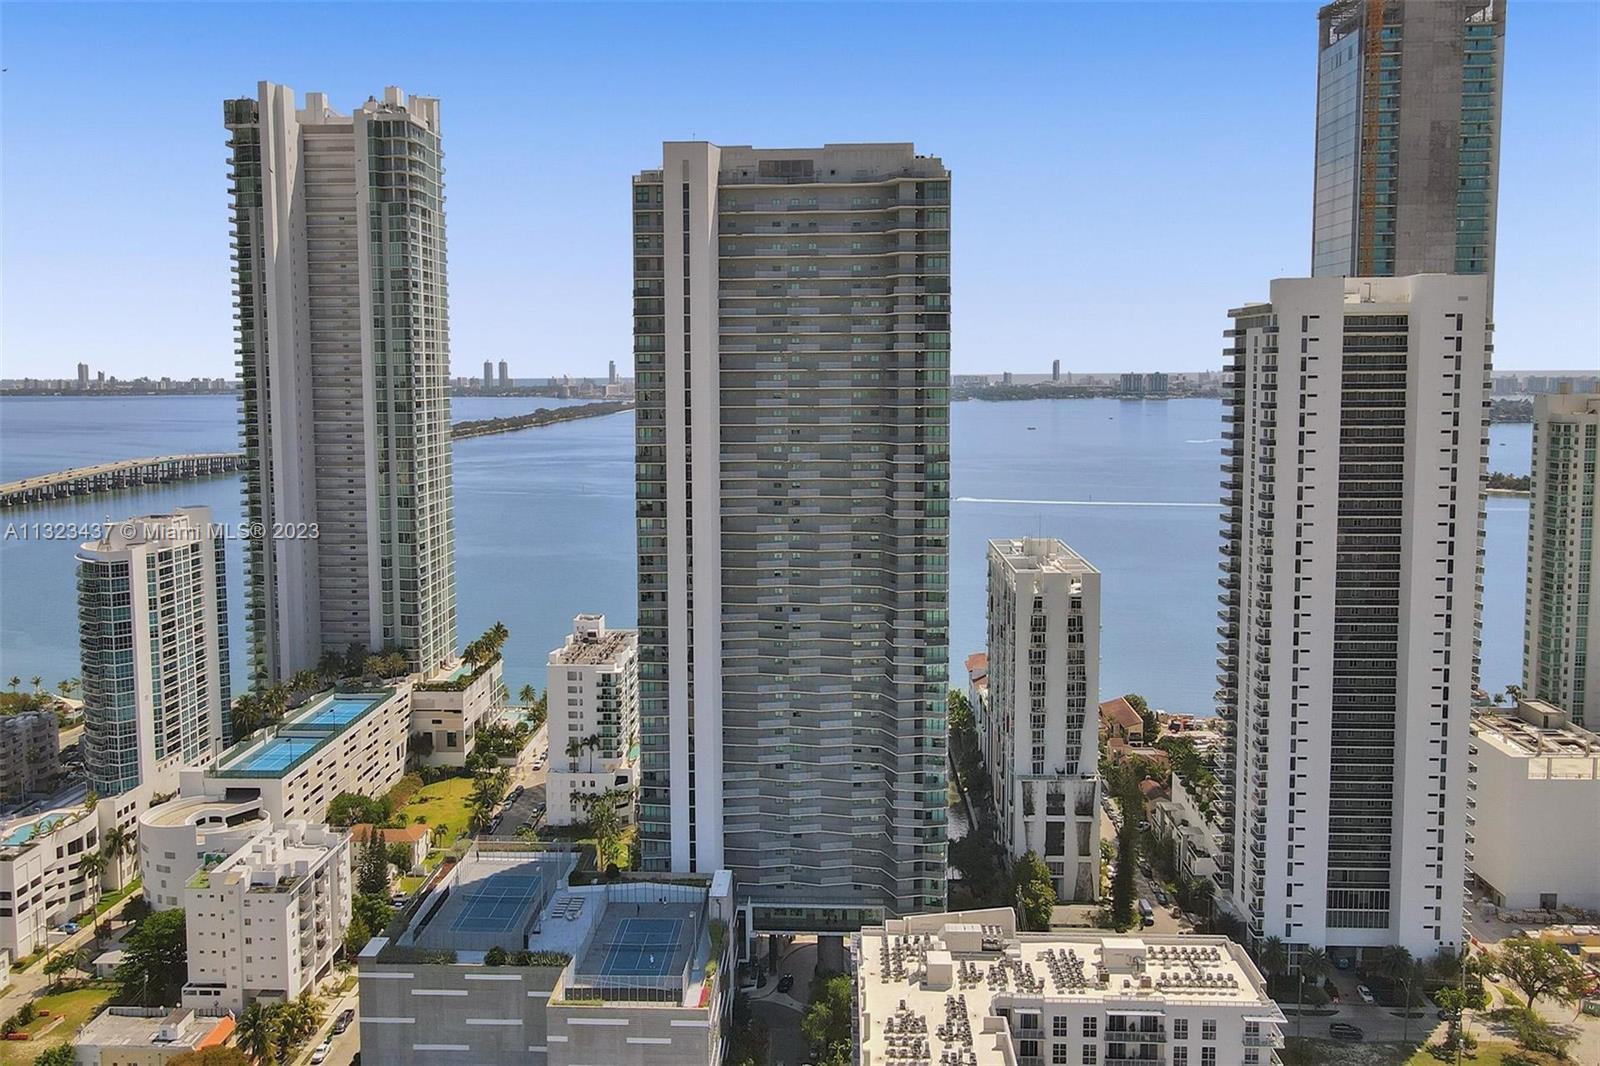 Welcome to the jewel of Edgewater, Icon Bay. Unit: 2001 is a fabulous NE corner unit with 2Bed/2Bath